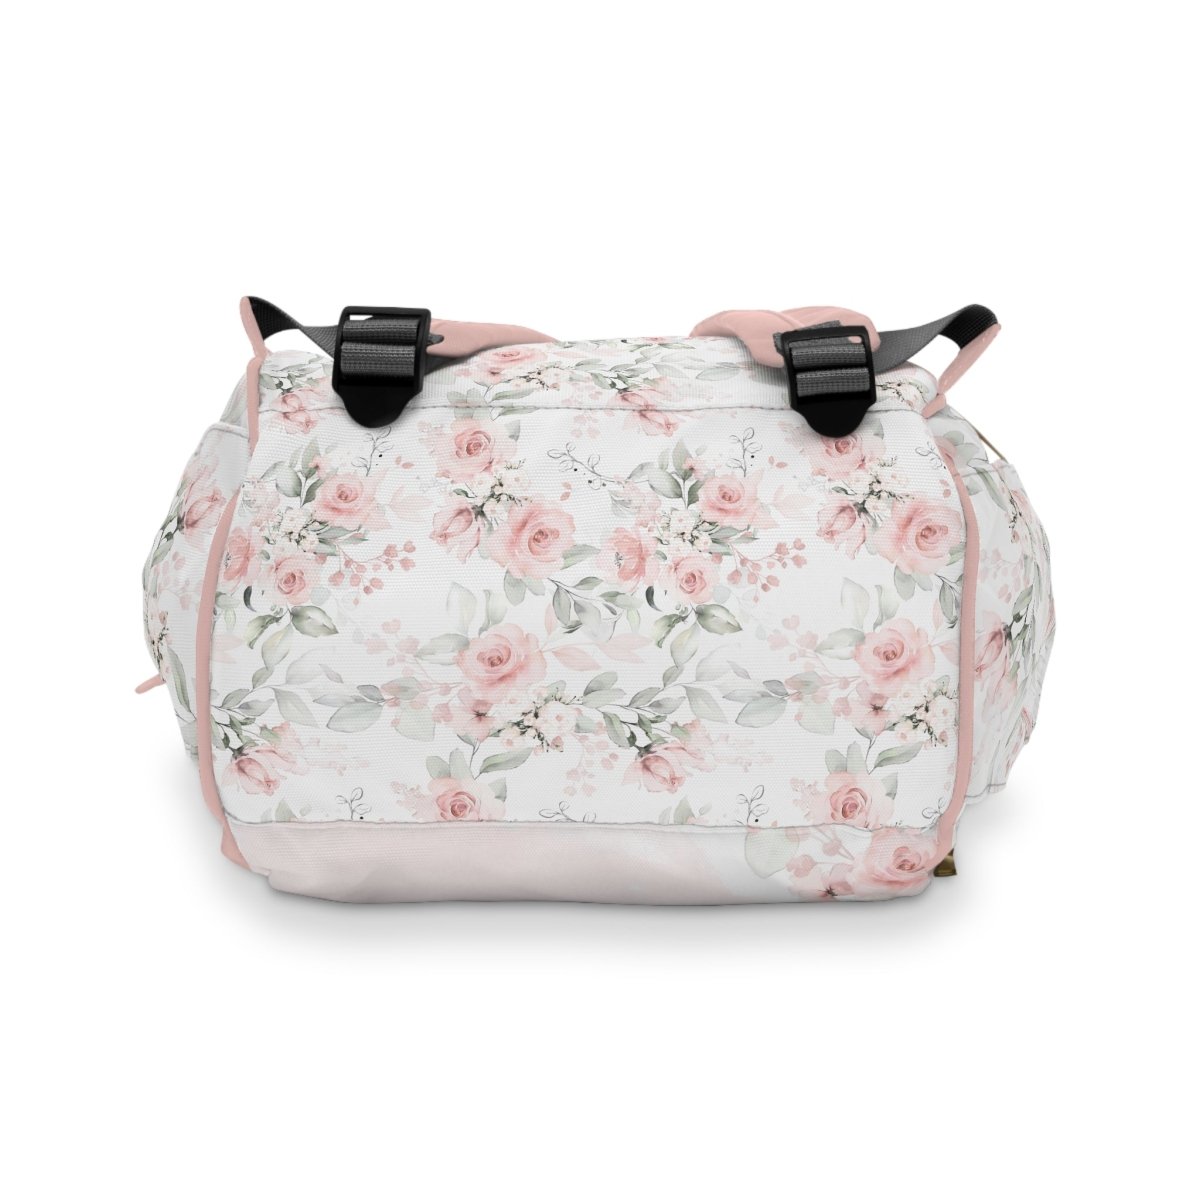 Highland Cow Floral Personalized Backpack Diaper Bag - gender_girl, Highland Cow Floral, text